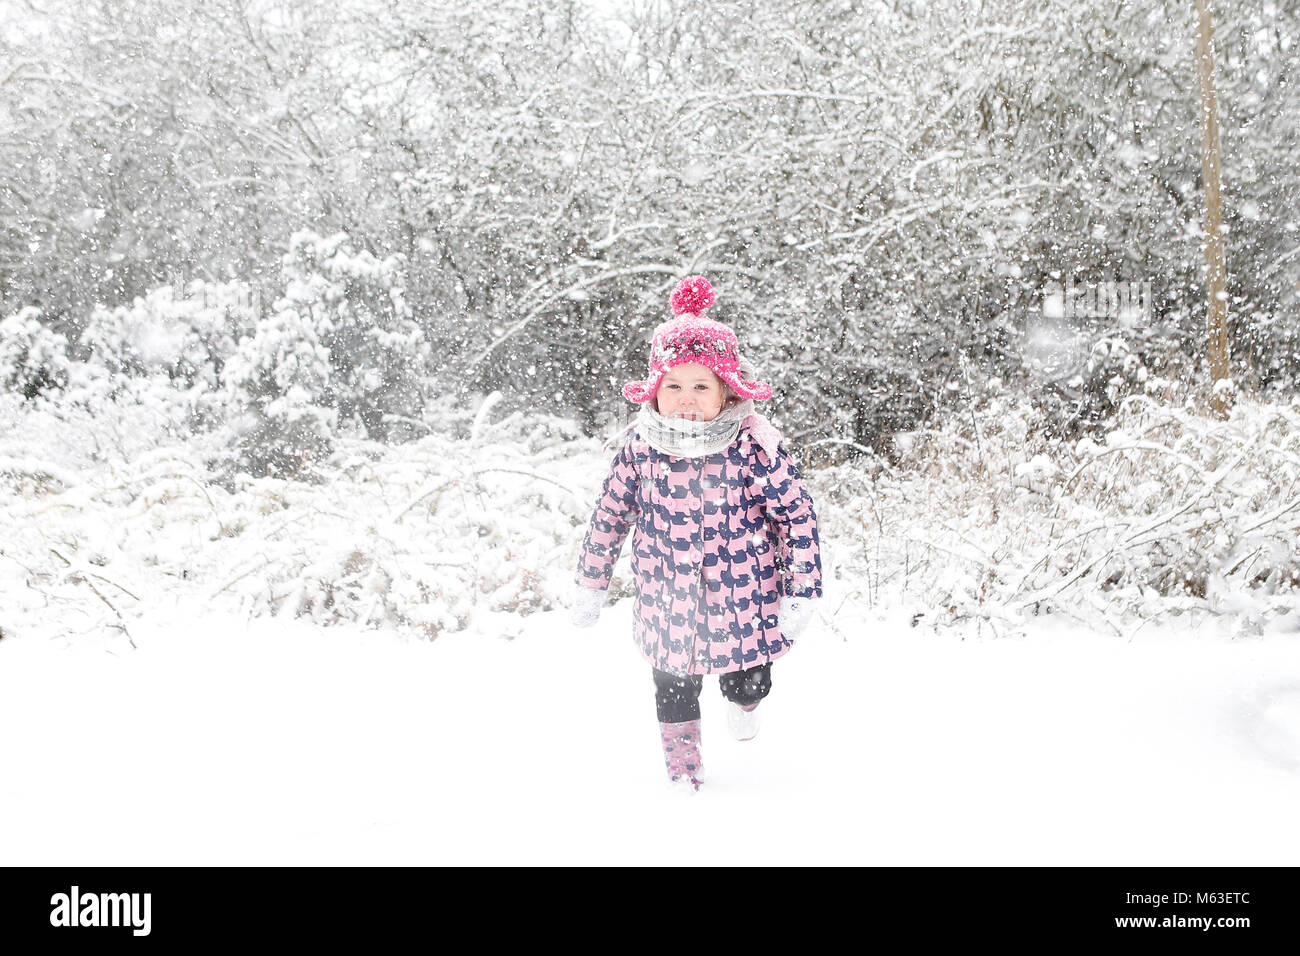 Cambridge, UK. 28th February 2018. Ivy Mitchell 2 1/2 years old plays in the snow near Cambridge, UK. Credit: Jason Mitchell/Alamy Live News. Stock Photo